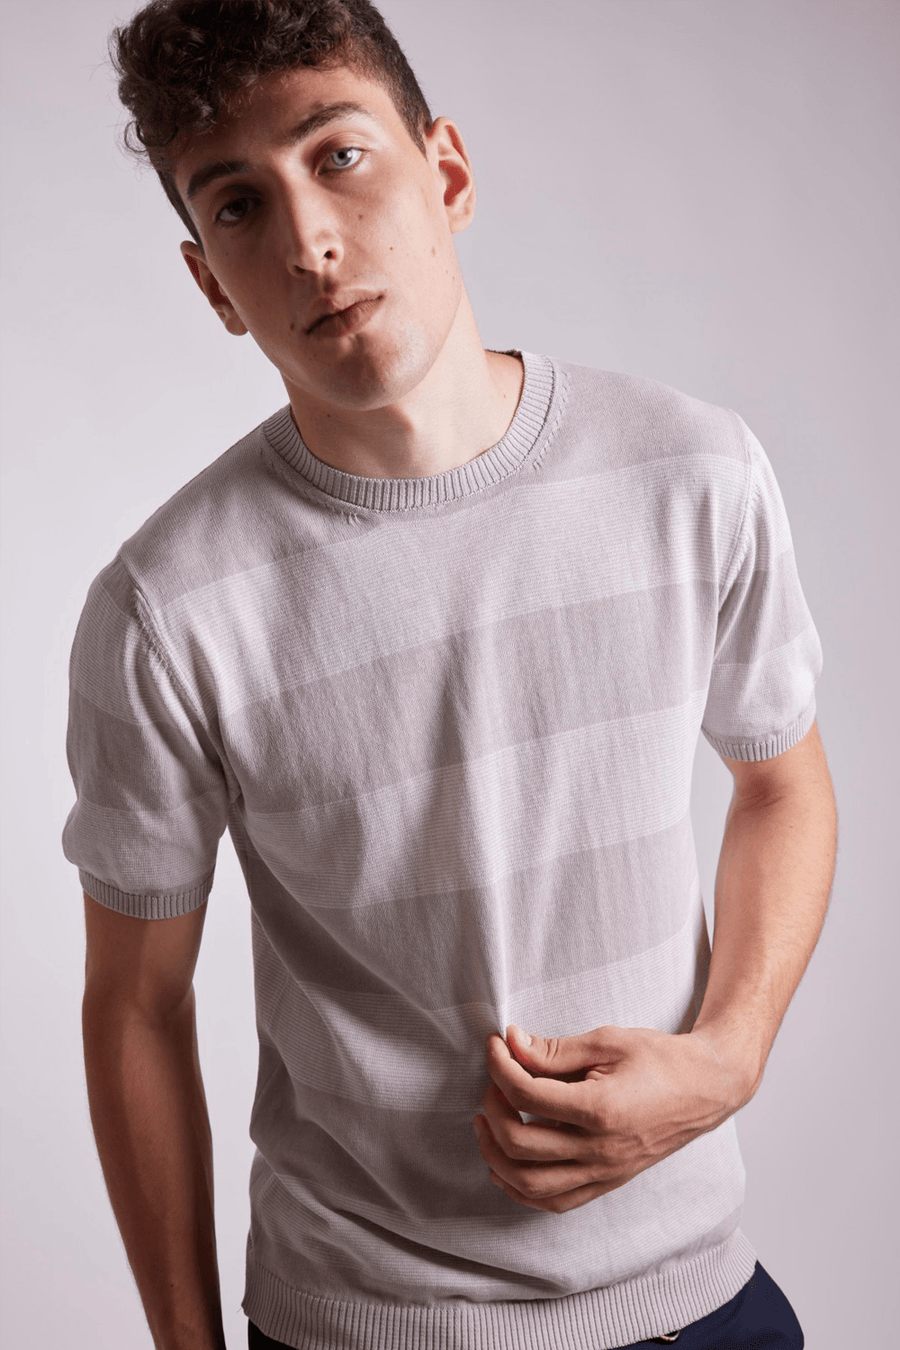 Buy the Daniele Fiesoli Stripes Cotton T-Shirt in Beige/White at Intro. Spend £50 for free UK delivery. Official stockists. We ship worldwide.